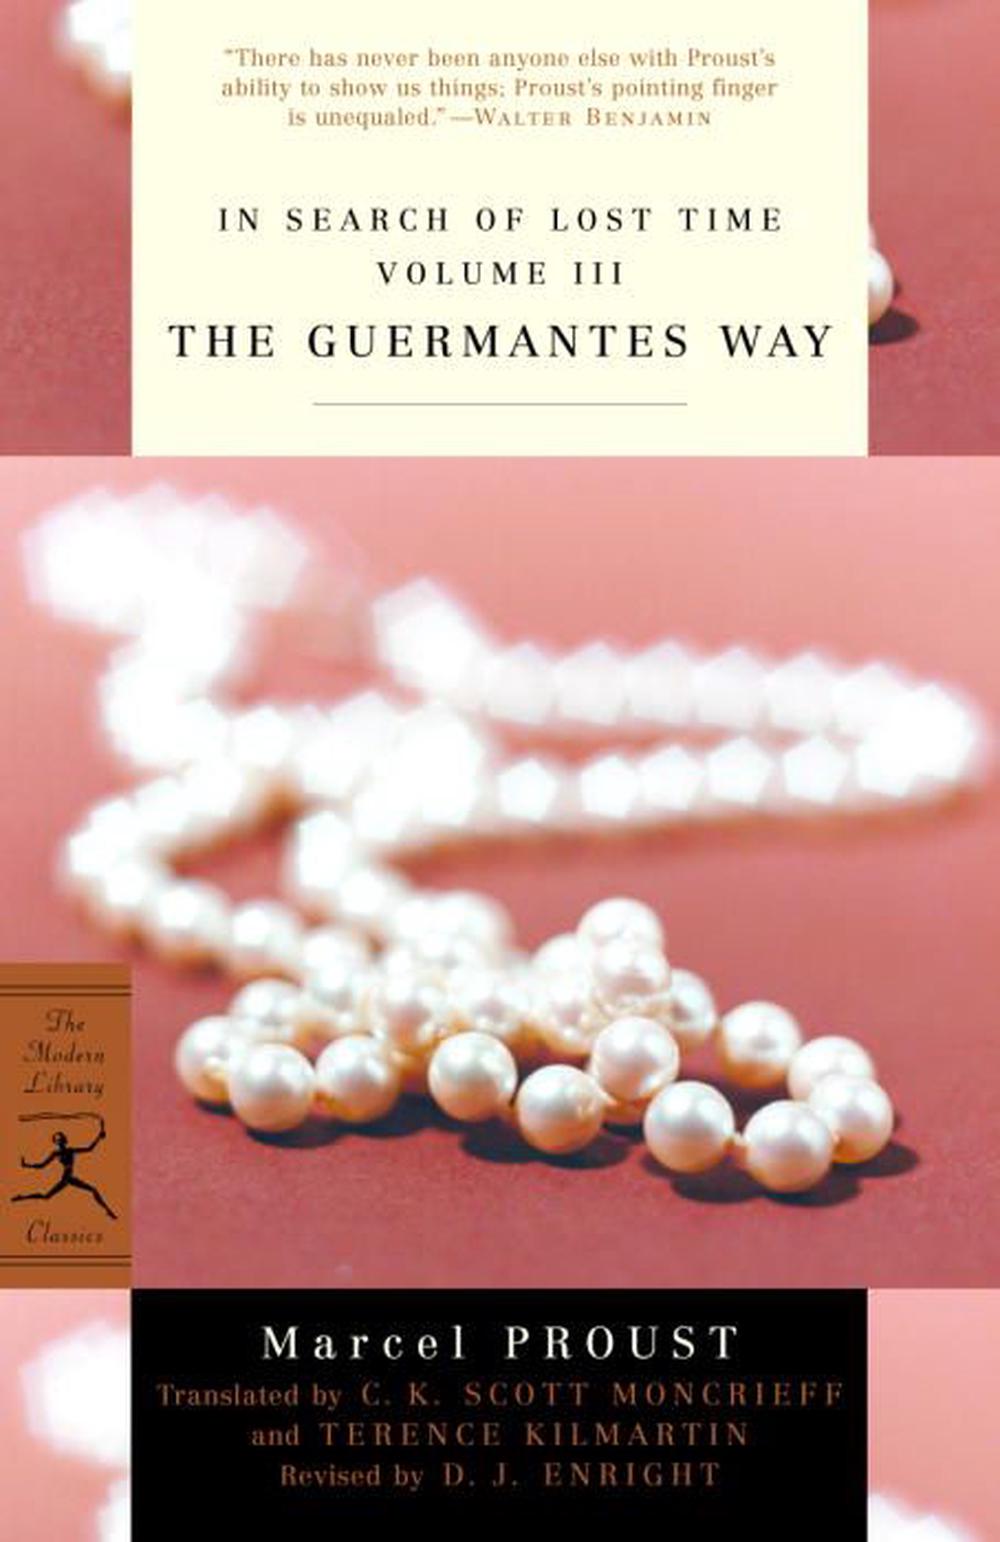 The Guermantes Way. In Search of Lost Time, Vol. III Cover art